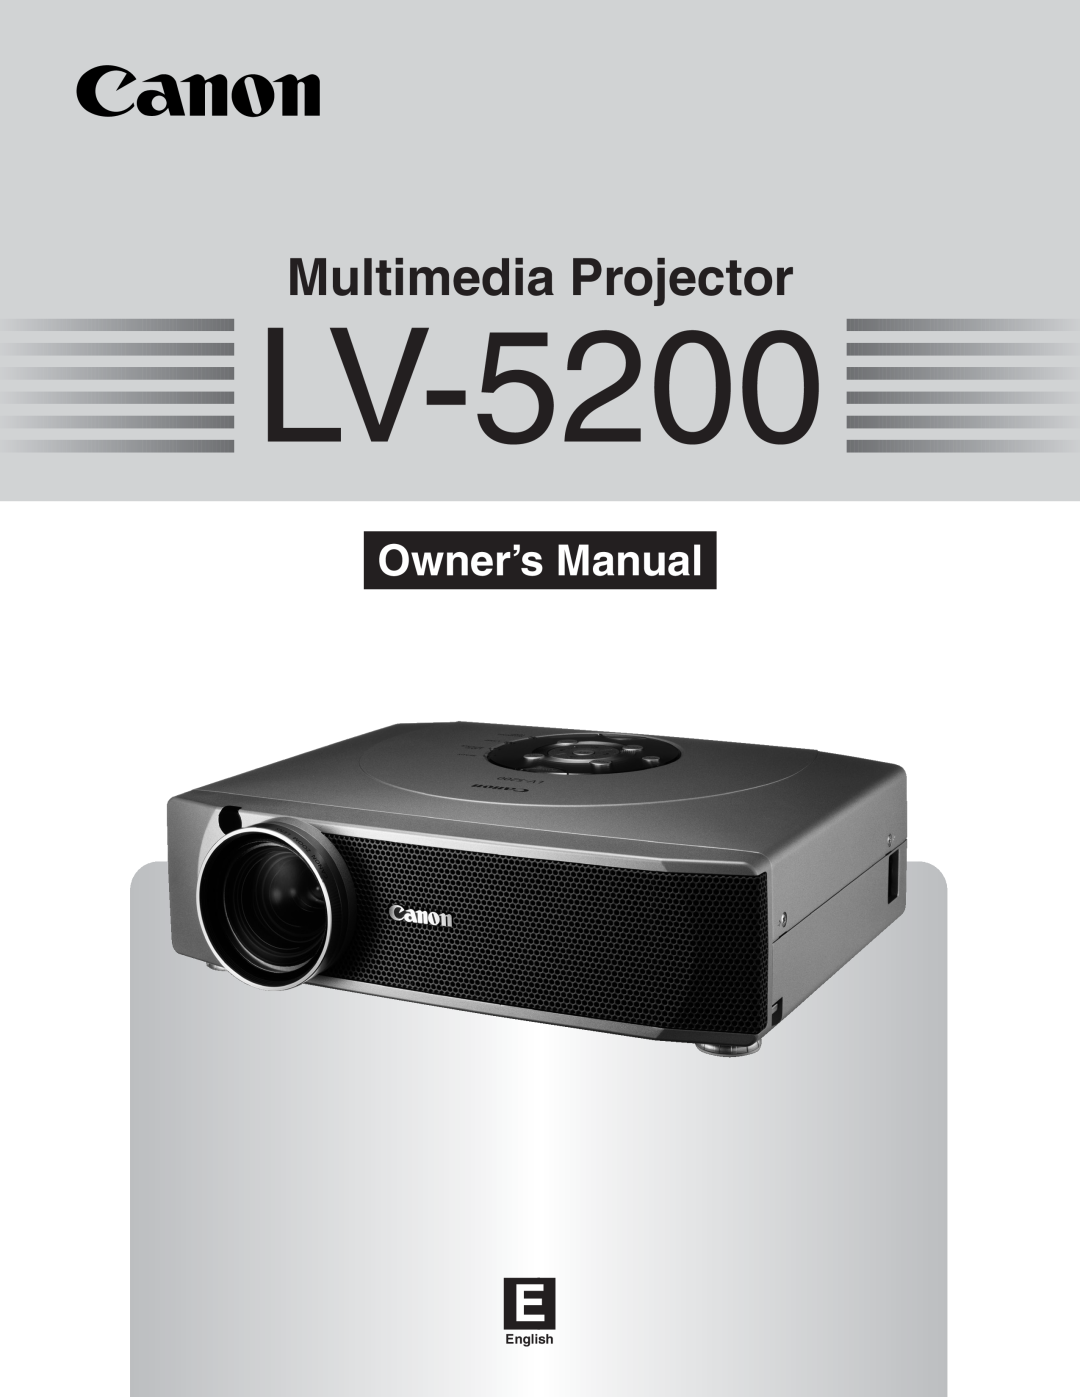 Canon LV-5200 owner manual Multimedia Projector, Owner’s Manual, English 